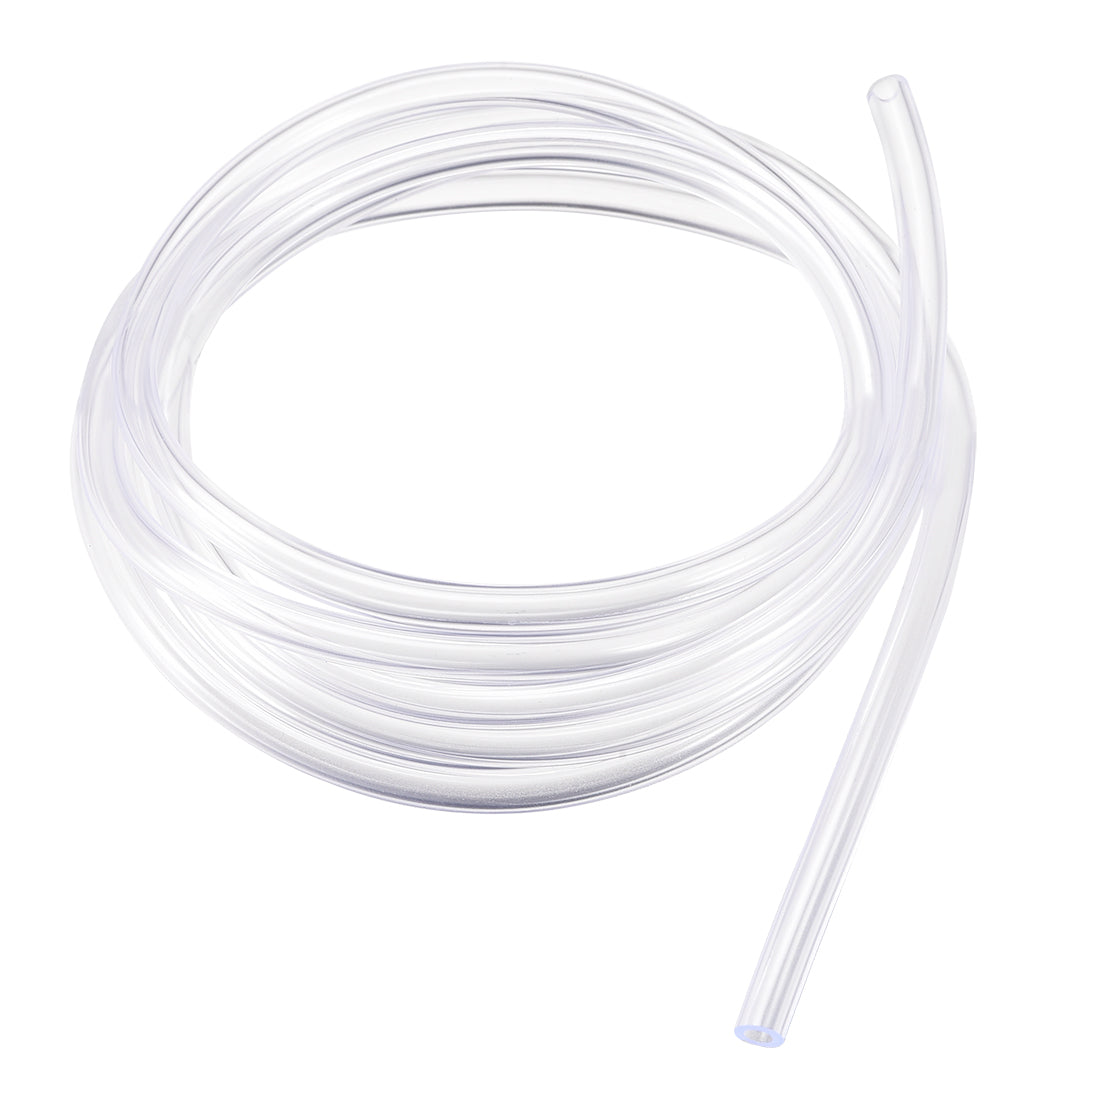 Uxcell Uxcell PVC Hose Tube, 7mm(0.27") ID x 10mm(0.39") OD 1.5m Clear Vinyl Tubing